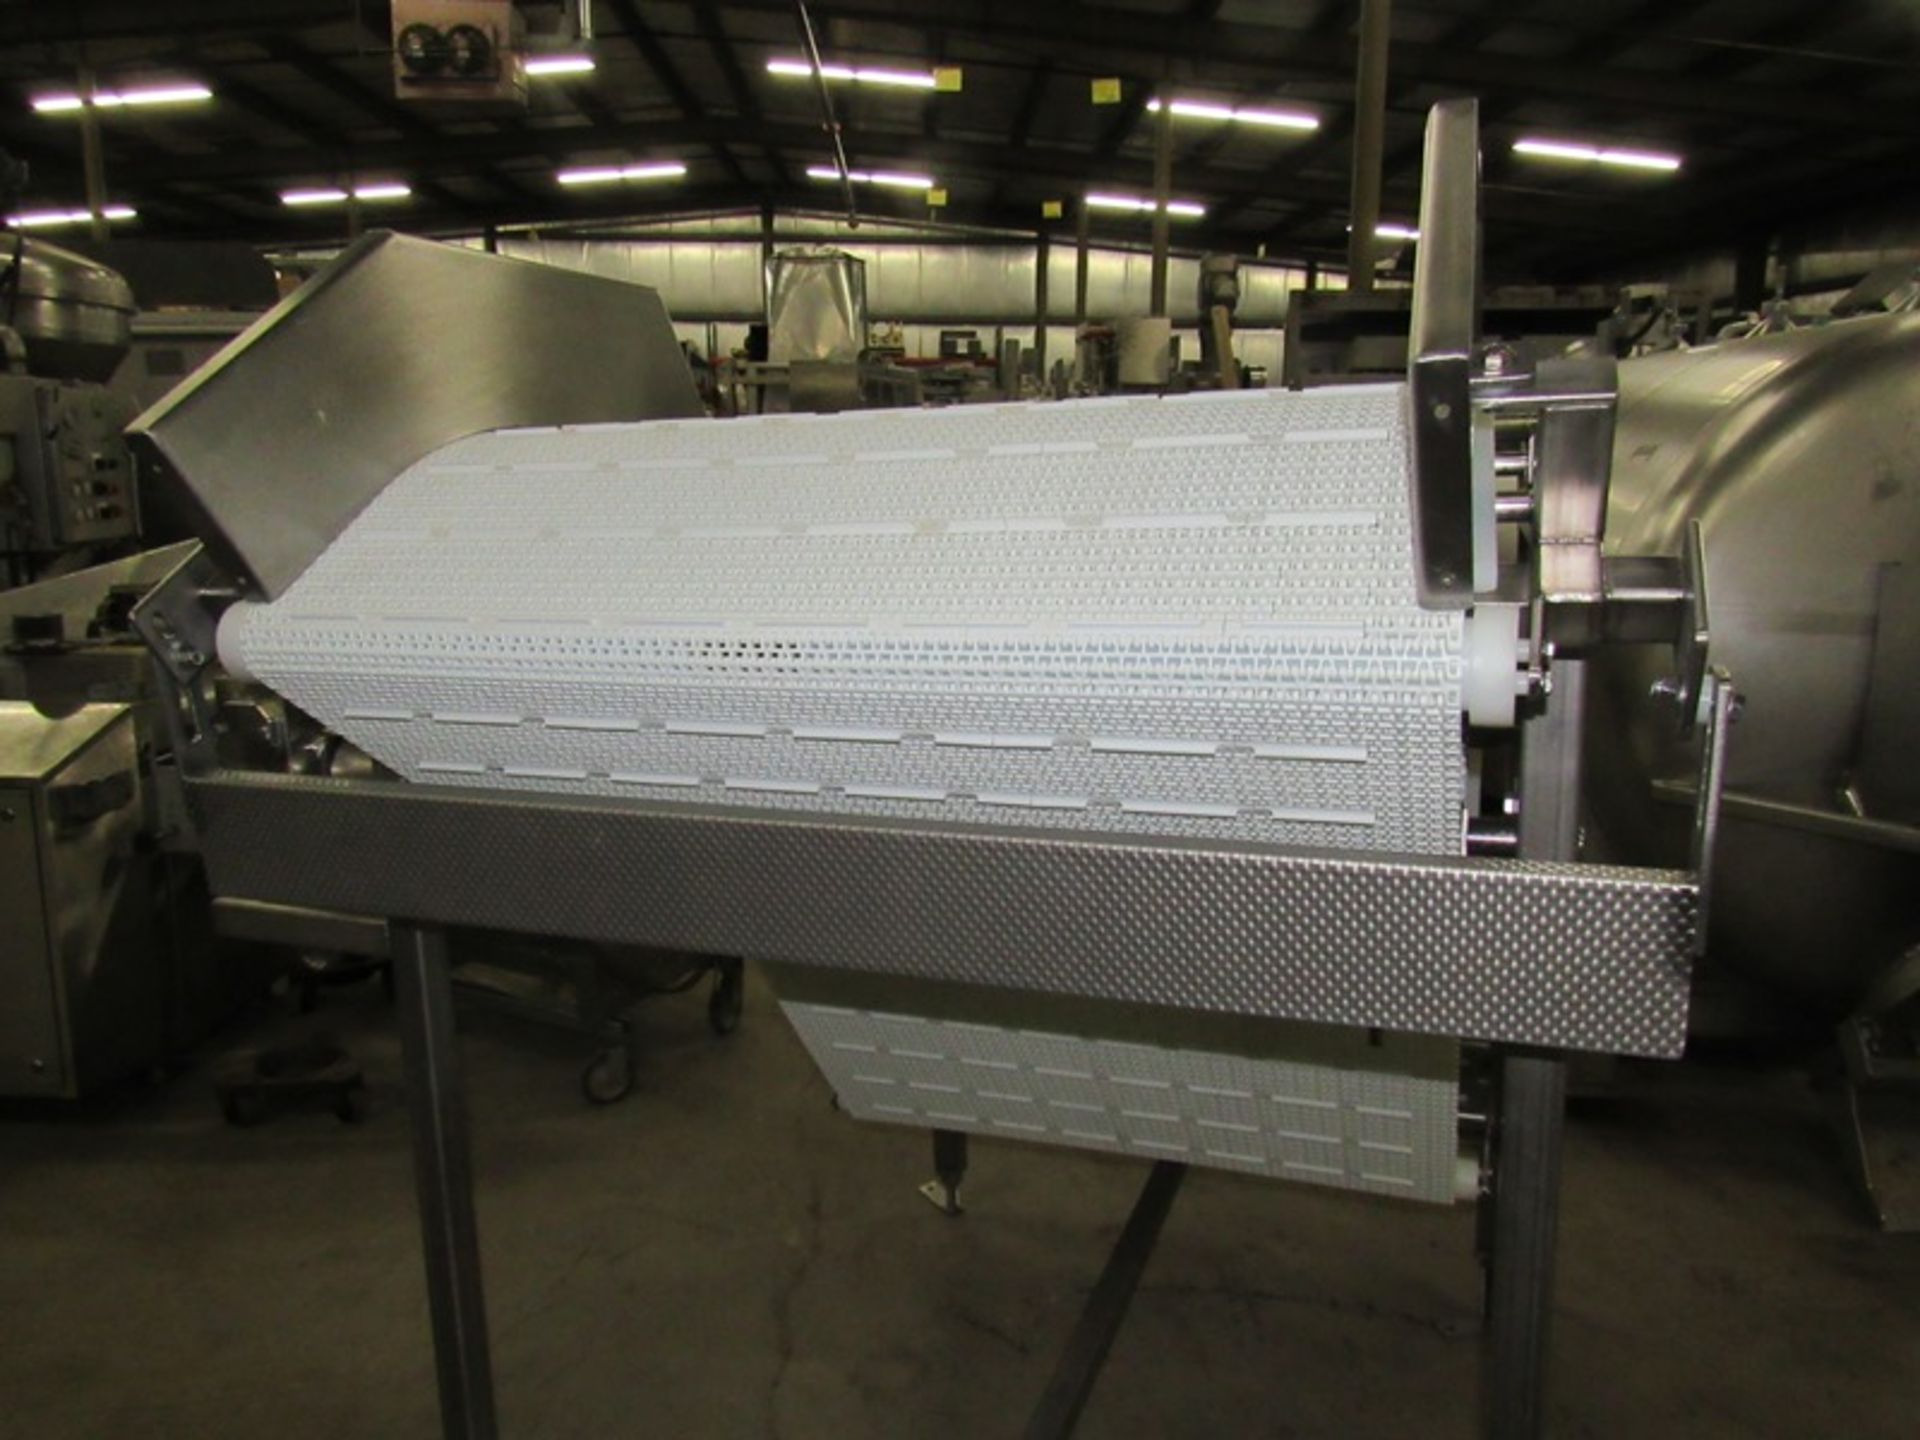 Stainless Steel Incline Conveyor, 34" W X 7' L flighted plastic belt, 1/4" high flights, spaced 3 - Image 5 of 6